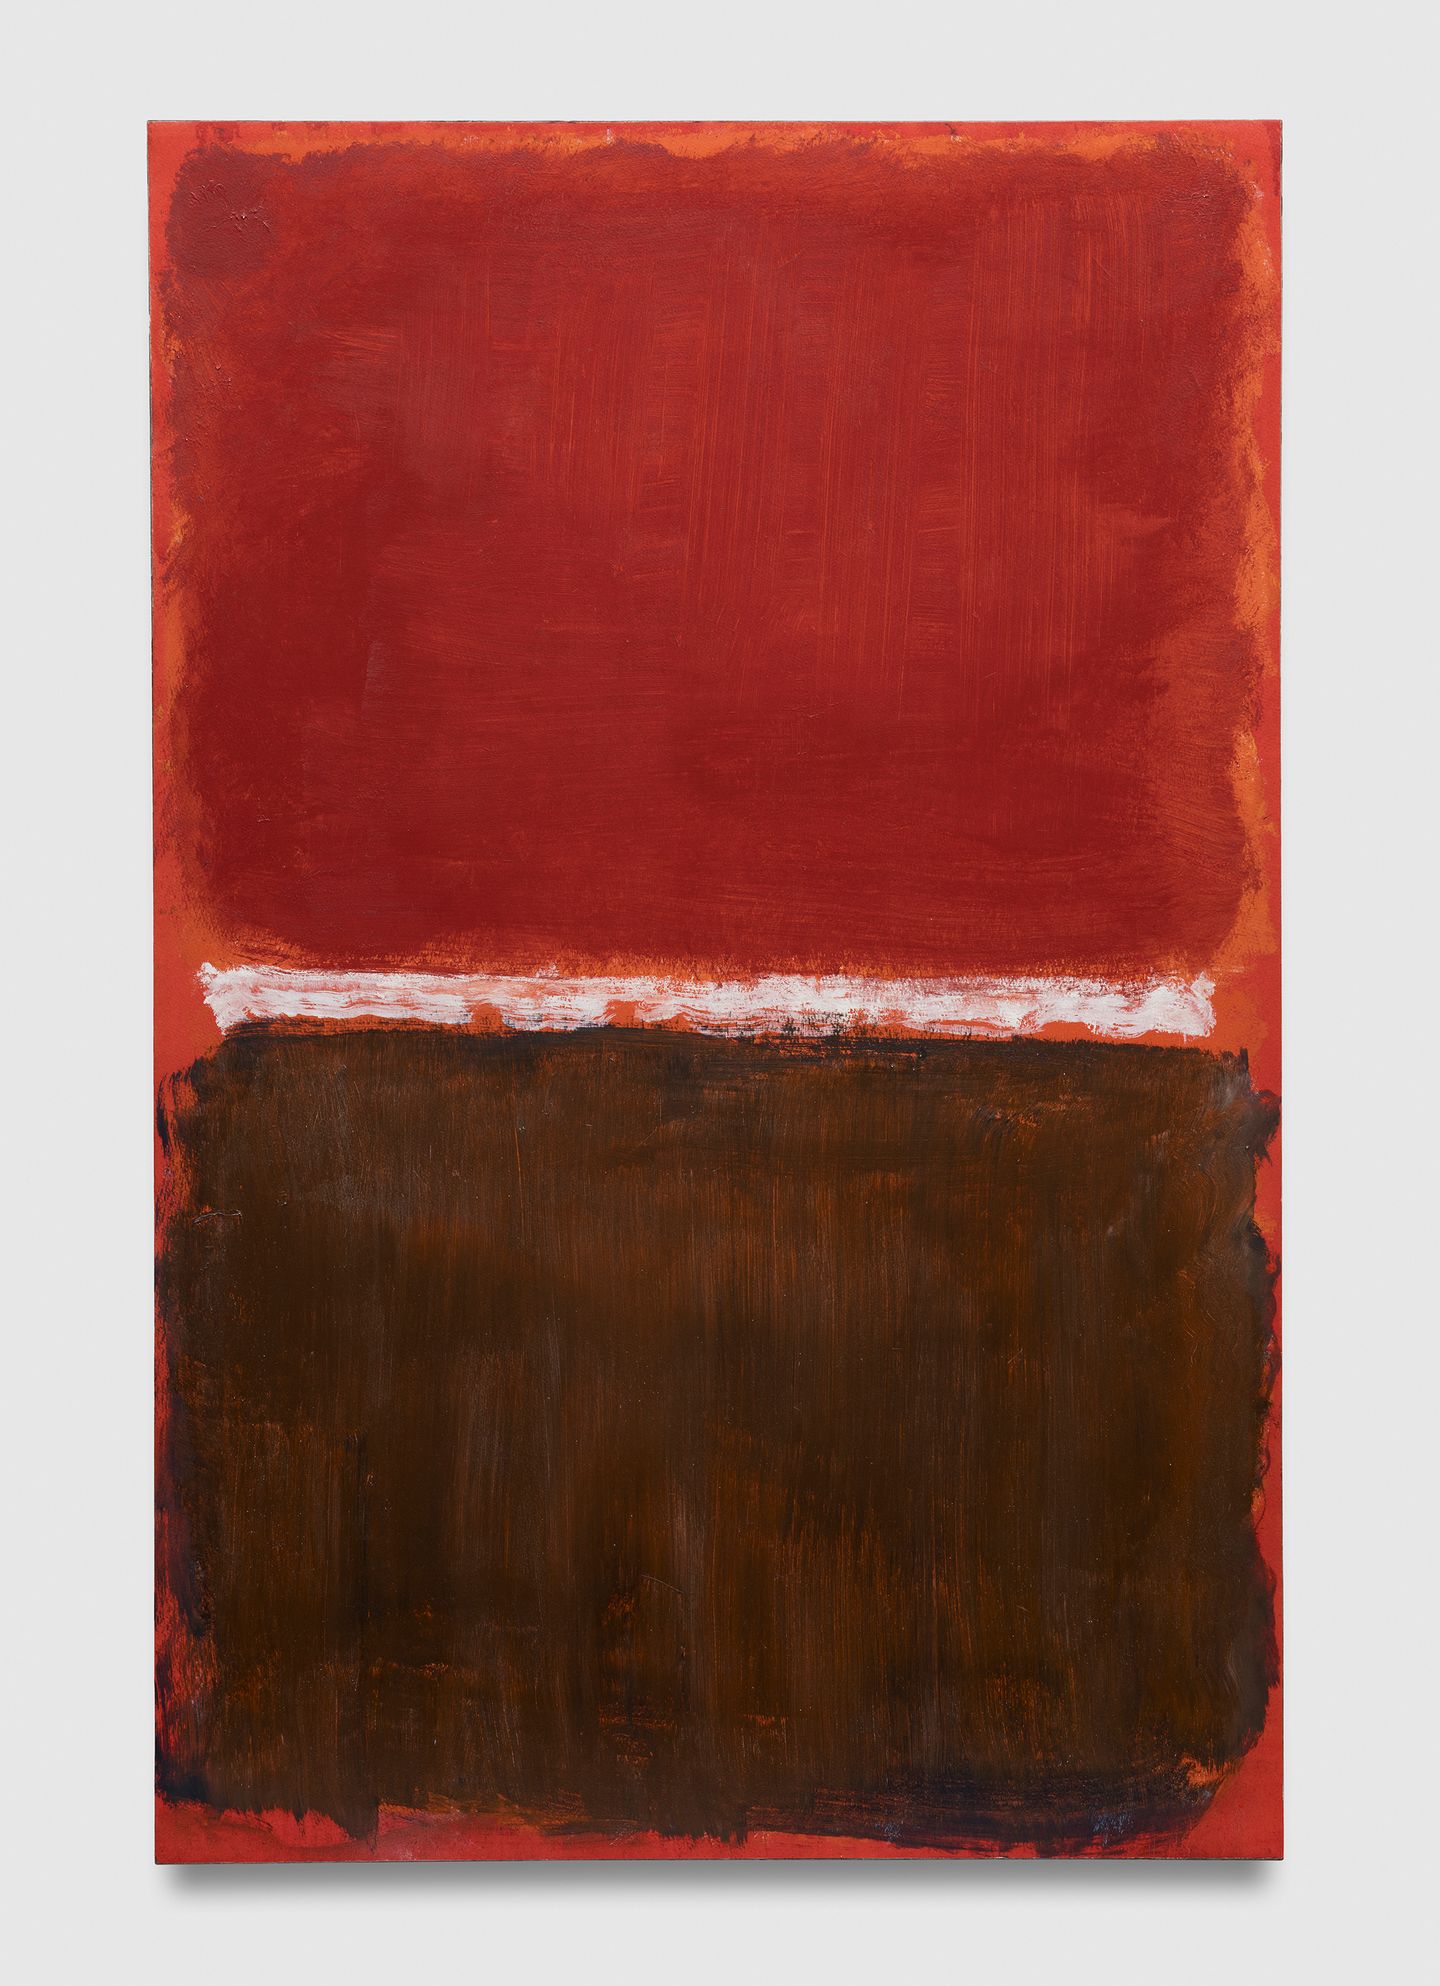 Mark Rothko, Untitled (1969). Acrylic on paper mounted on panel. 101.6 cm × 67.3 cm. © Kate Rothko Prizel and Christopher Rothko. Courtesy Pace Gallery.